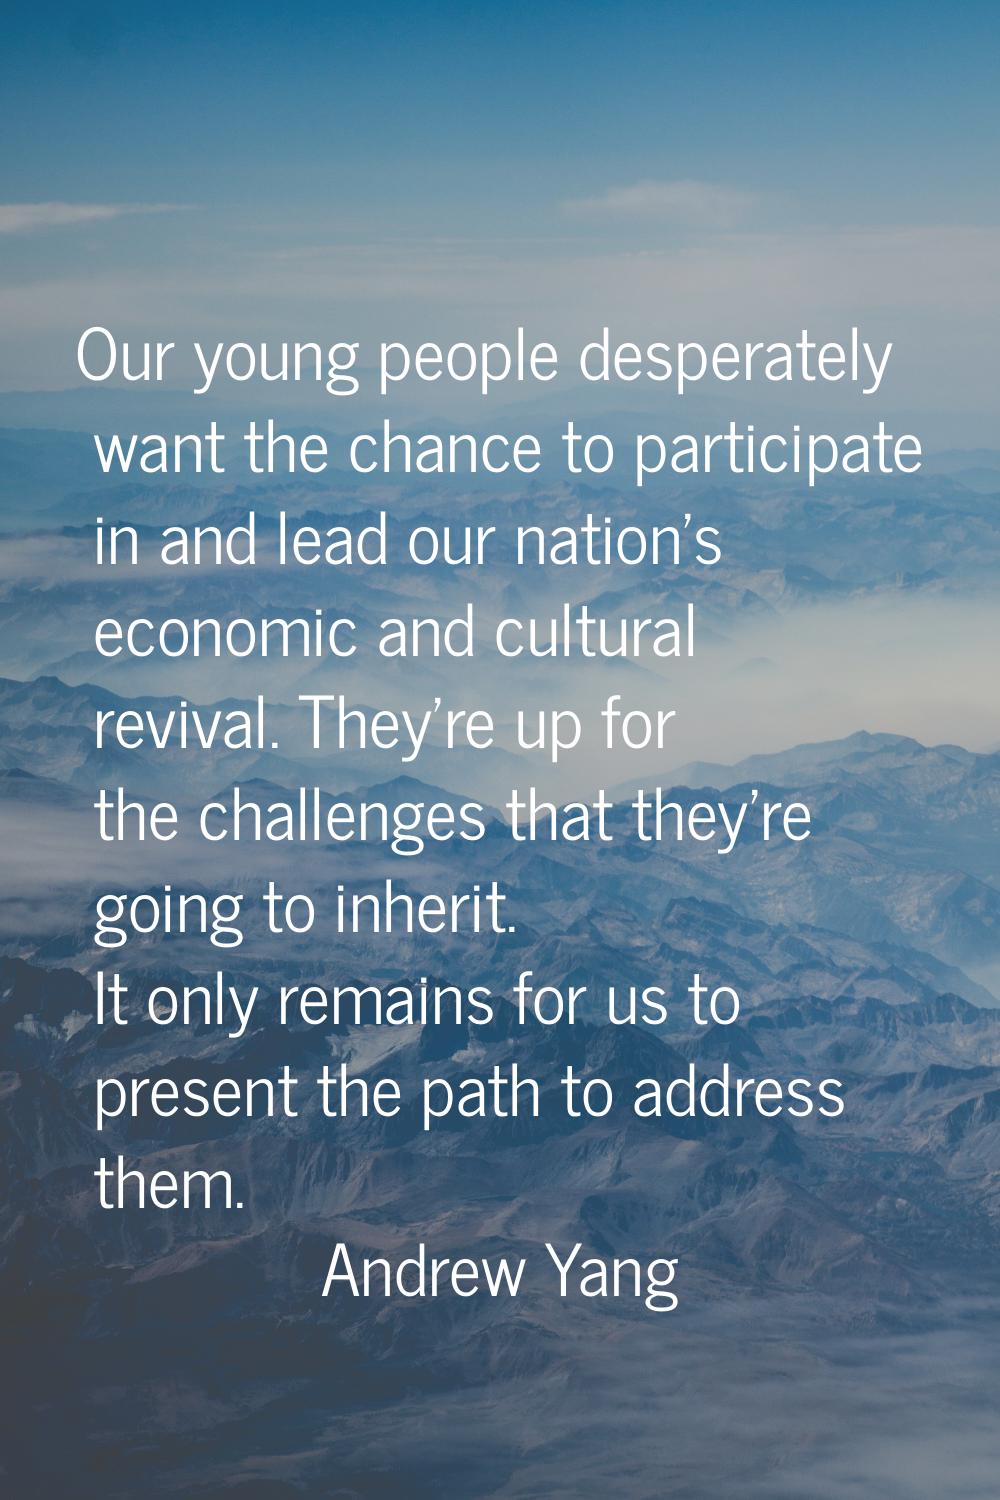 Our young people desperately want the chance to participate in and lead our nation's economic and c